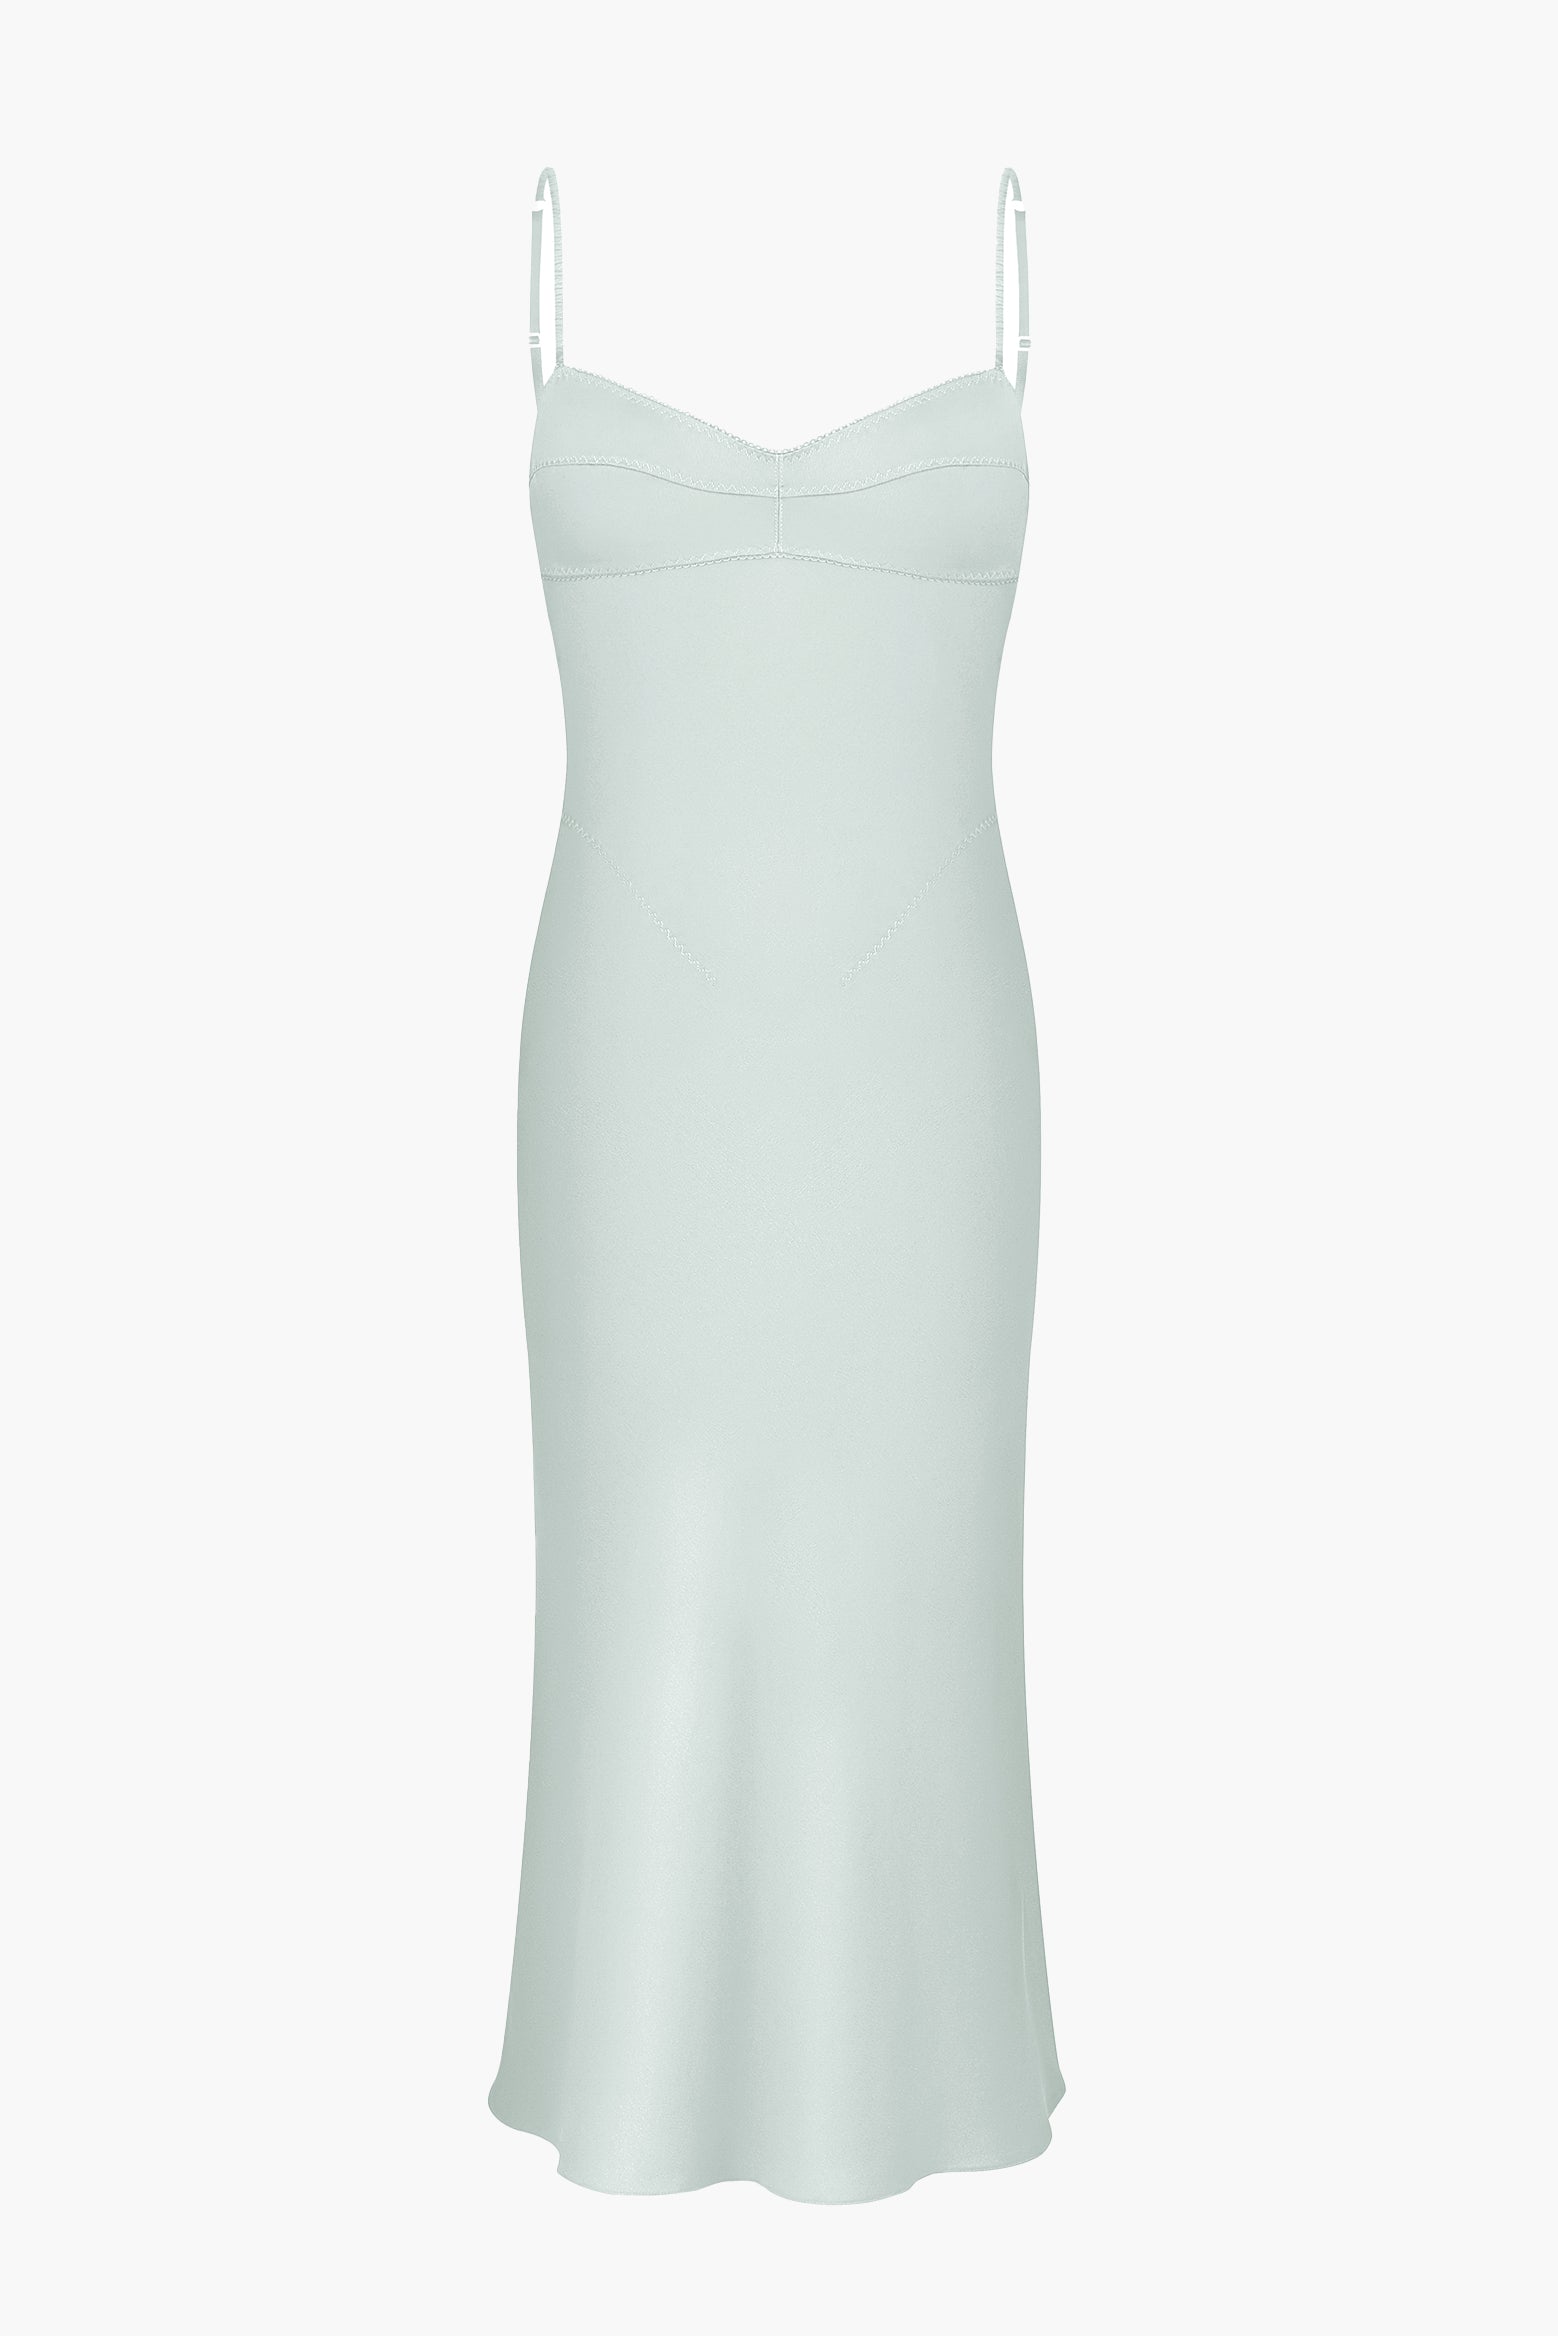 Anna October Georgina Maxi Dress in Mint available at The New Trend Australia.